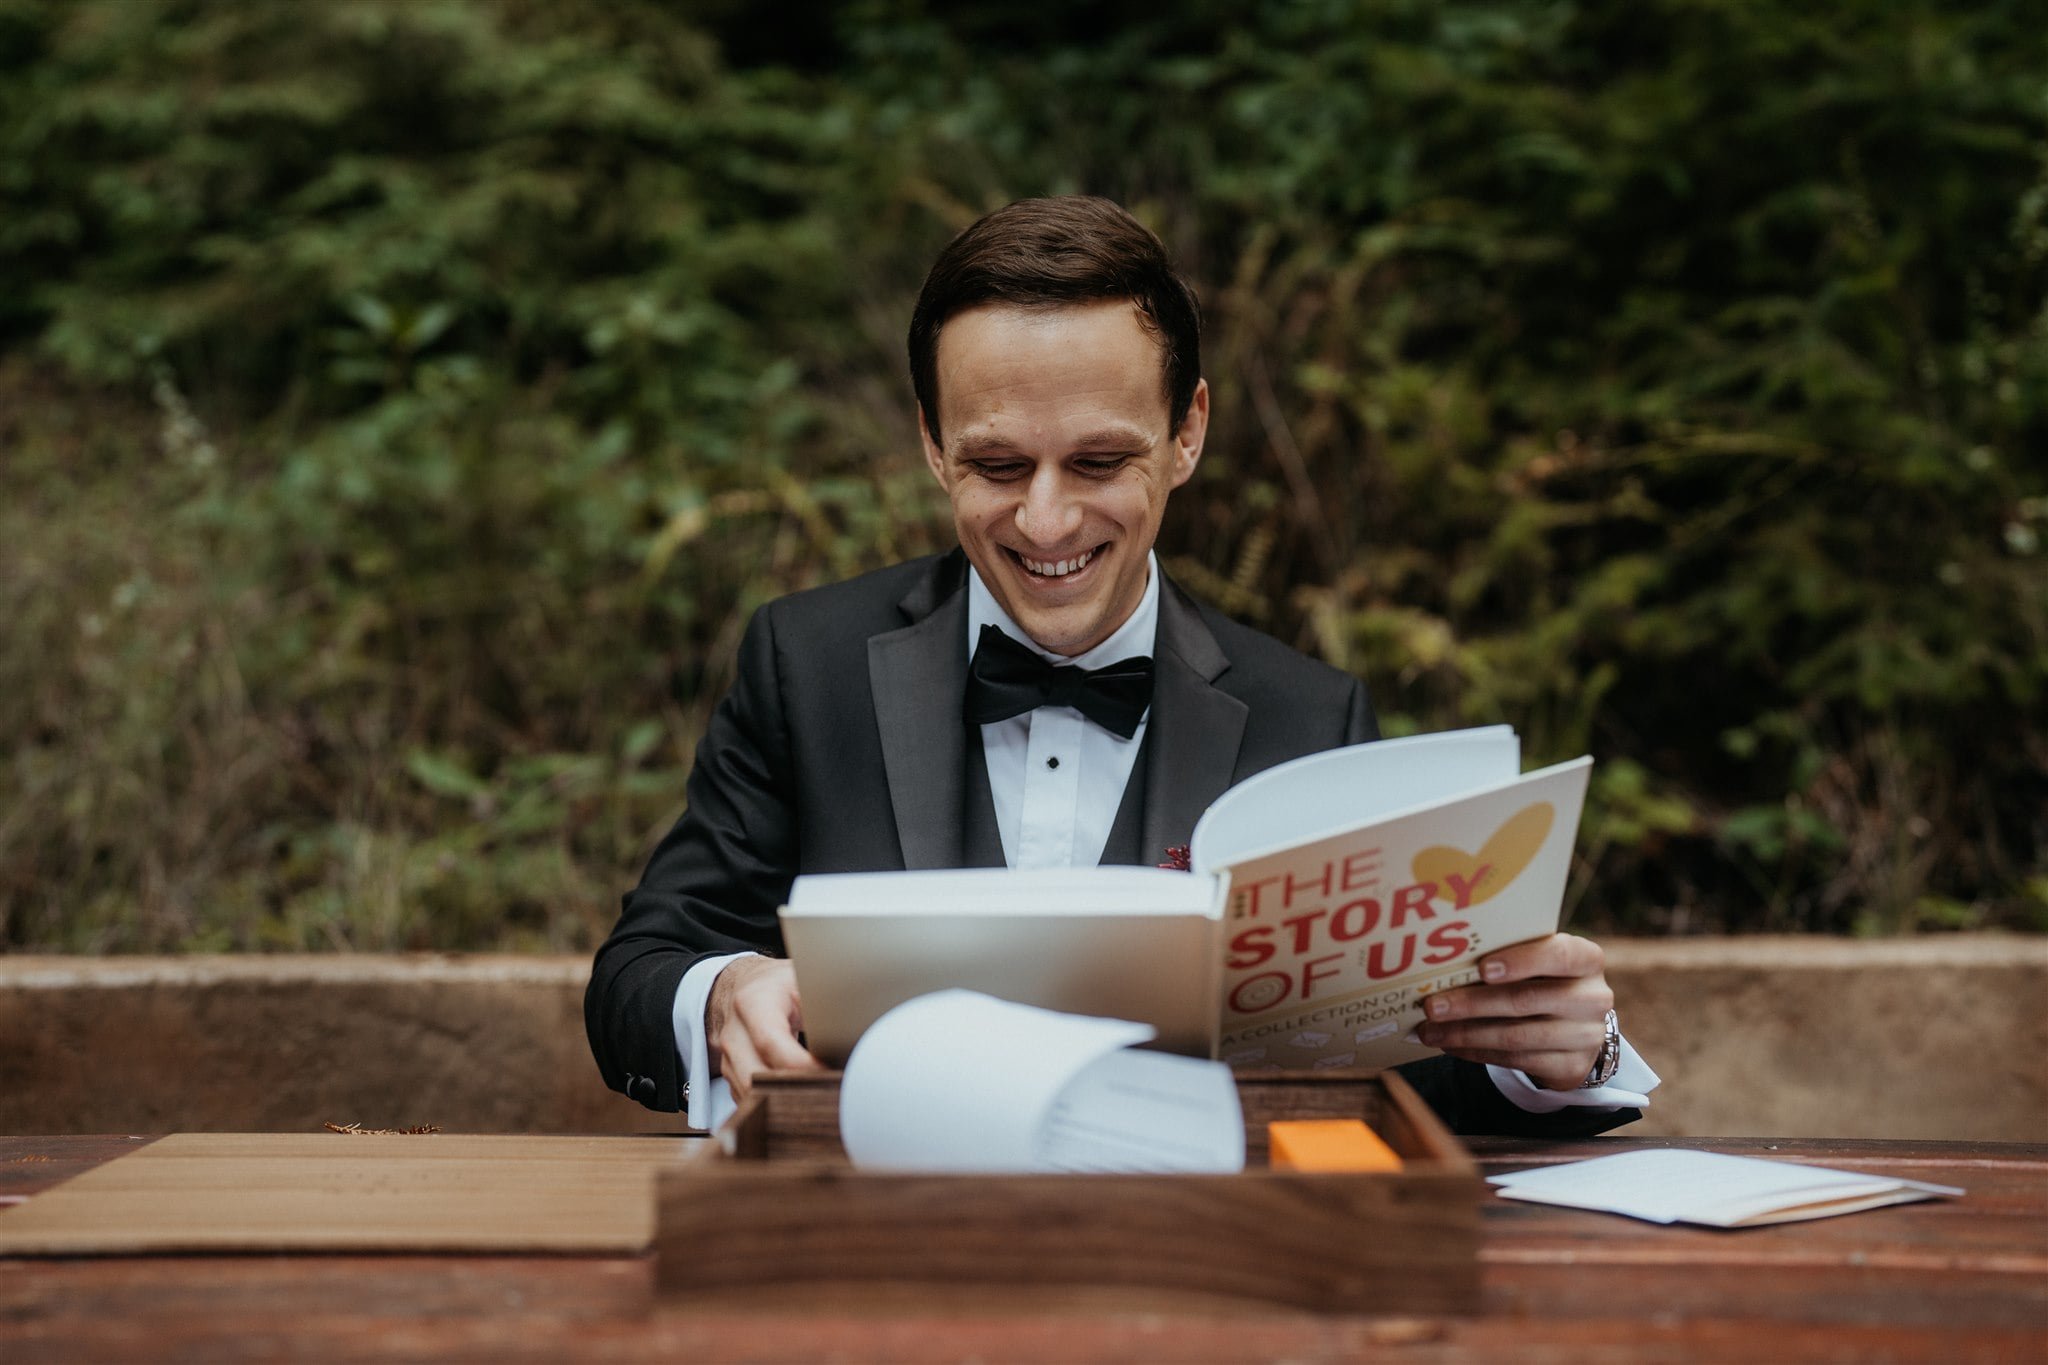 Groom smiling while reading gifted book from bride